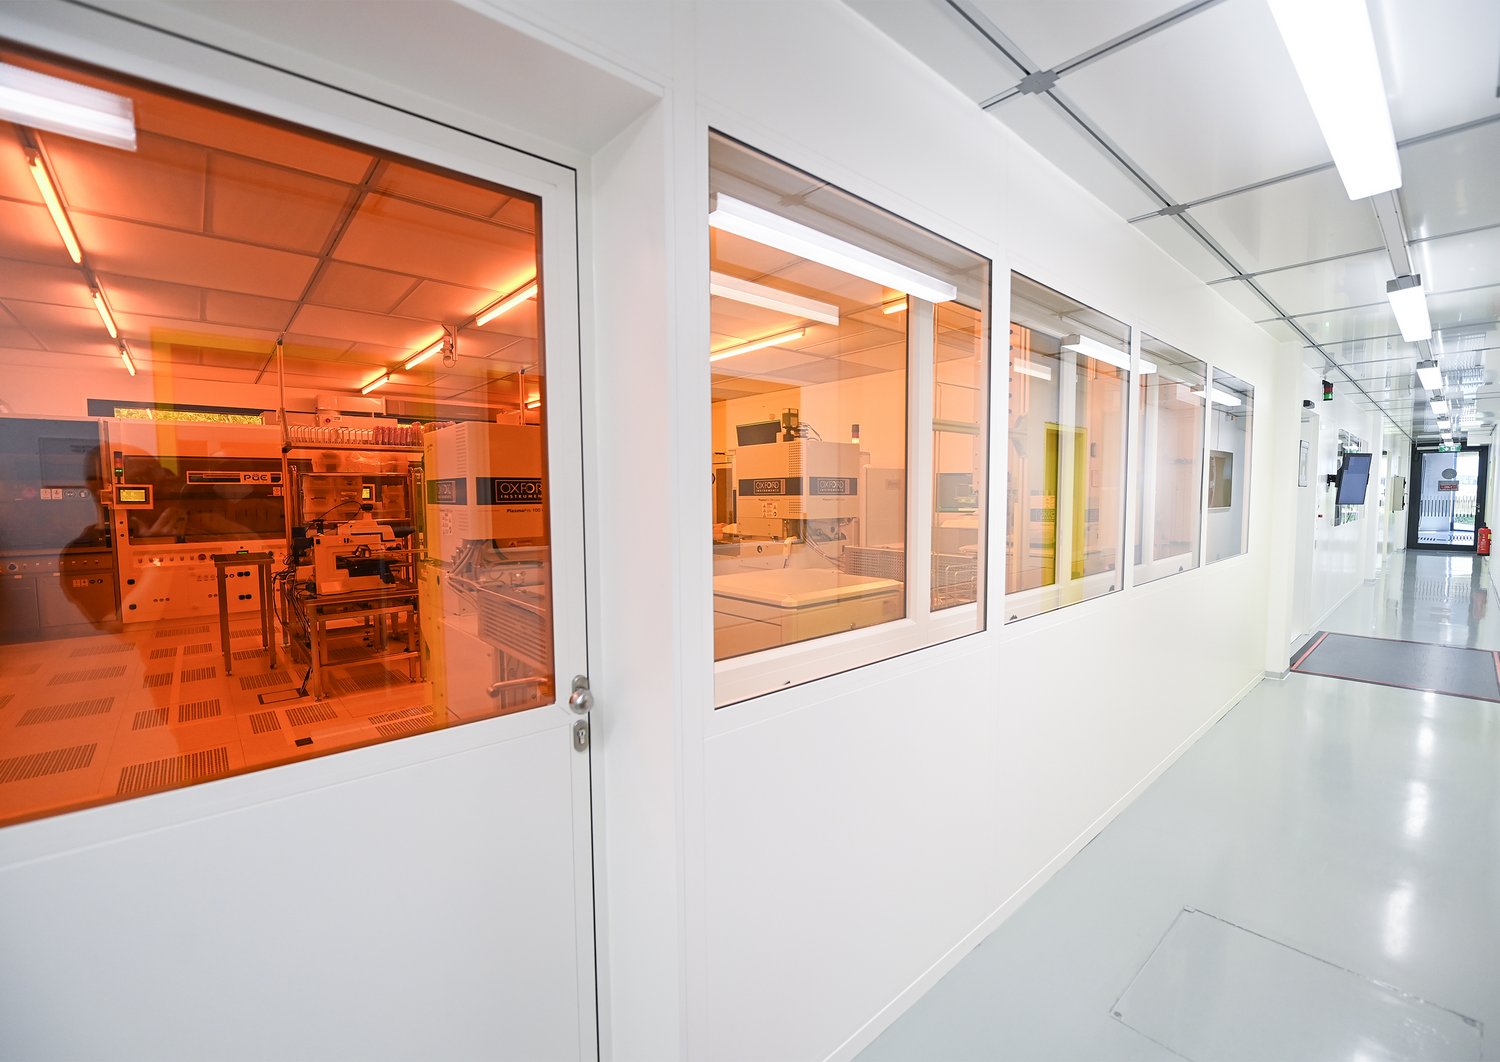 Research cleanroom